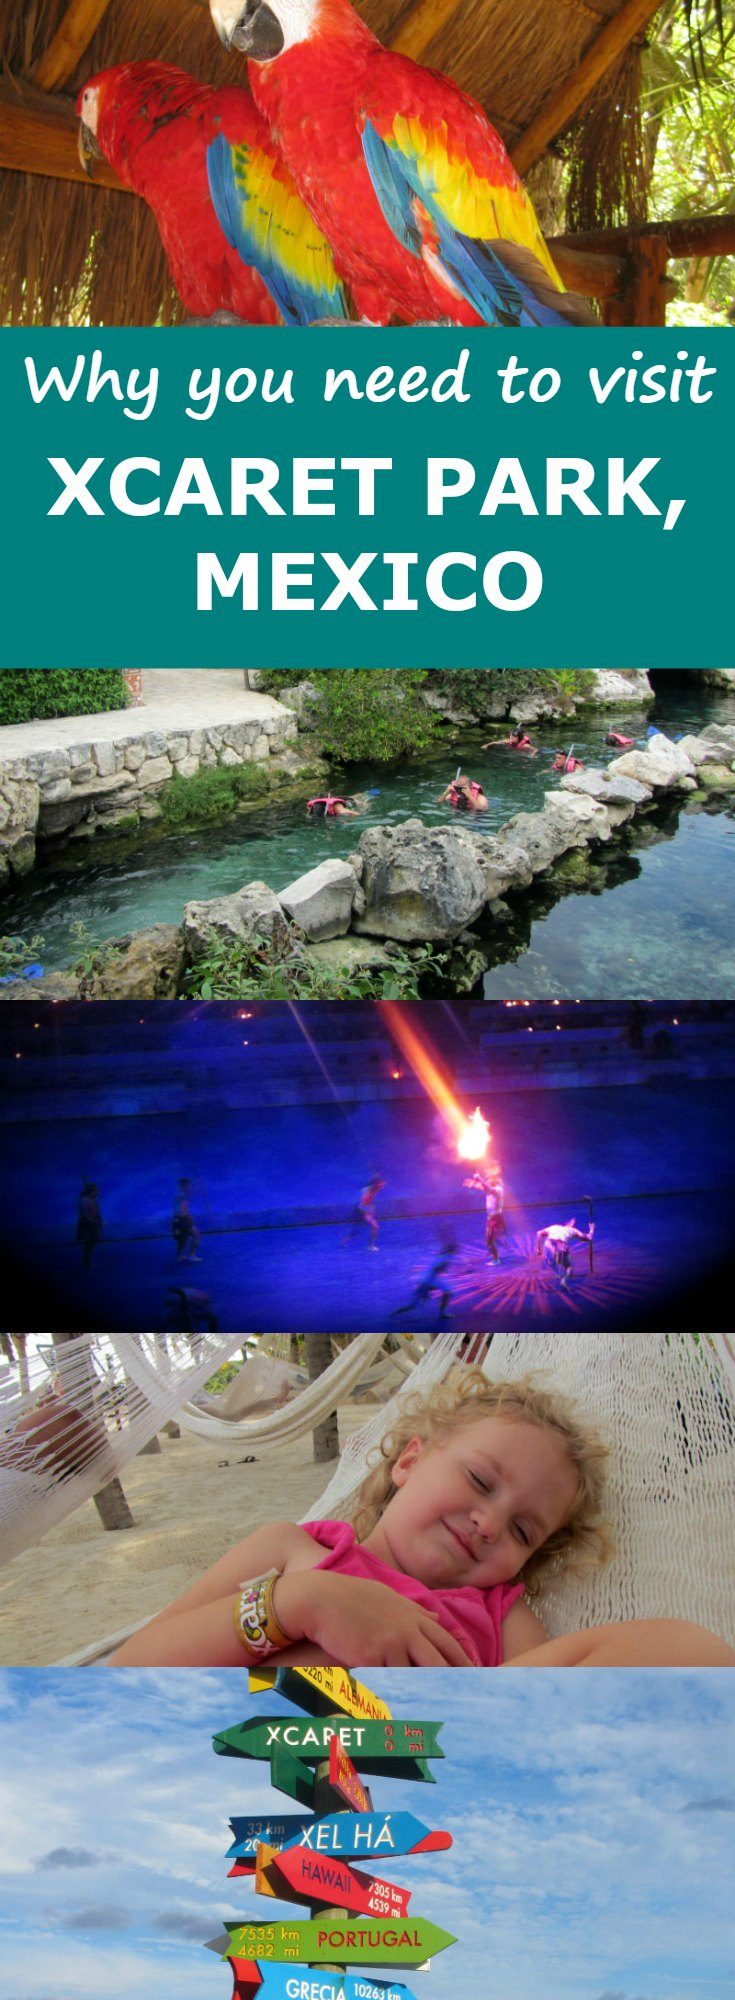 Our Guided Tour and Review of Xcaret Park in Mexico